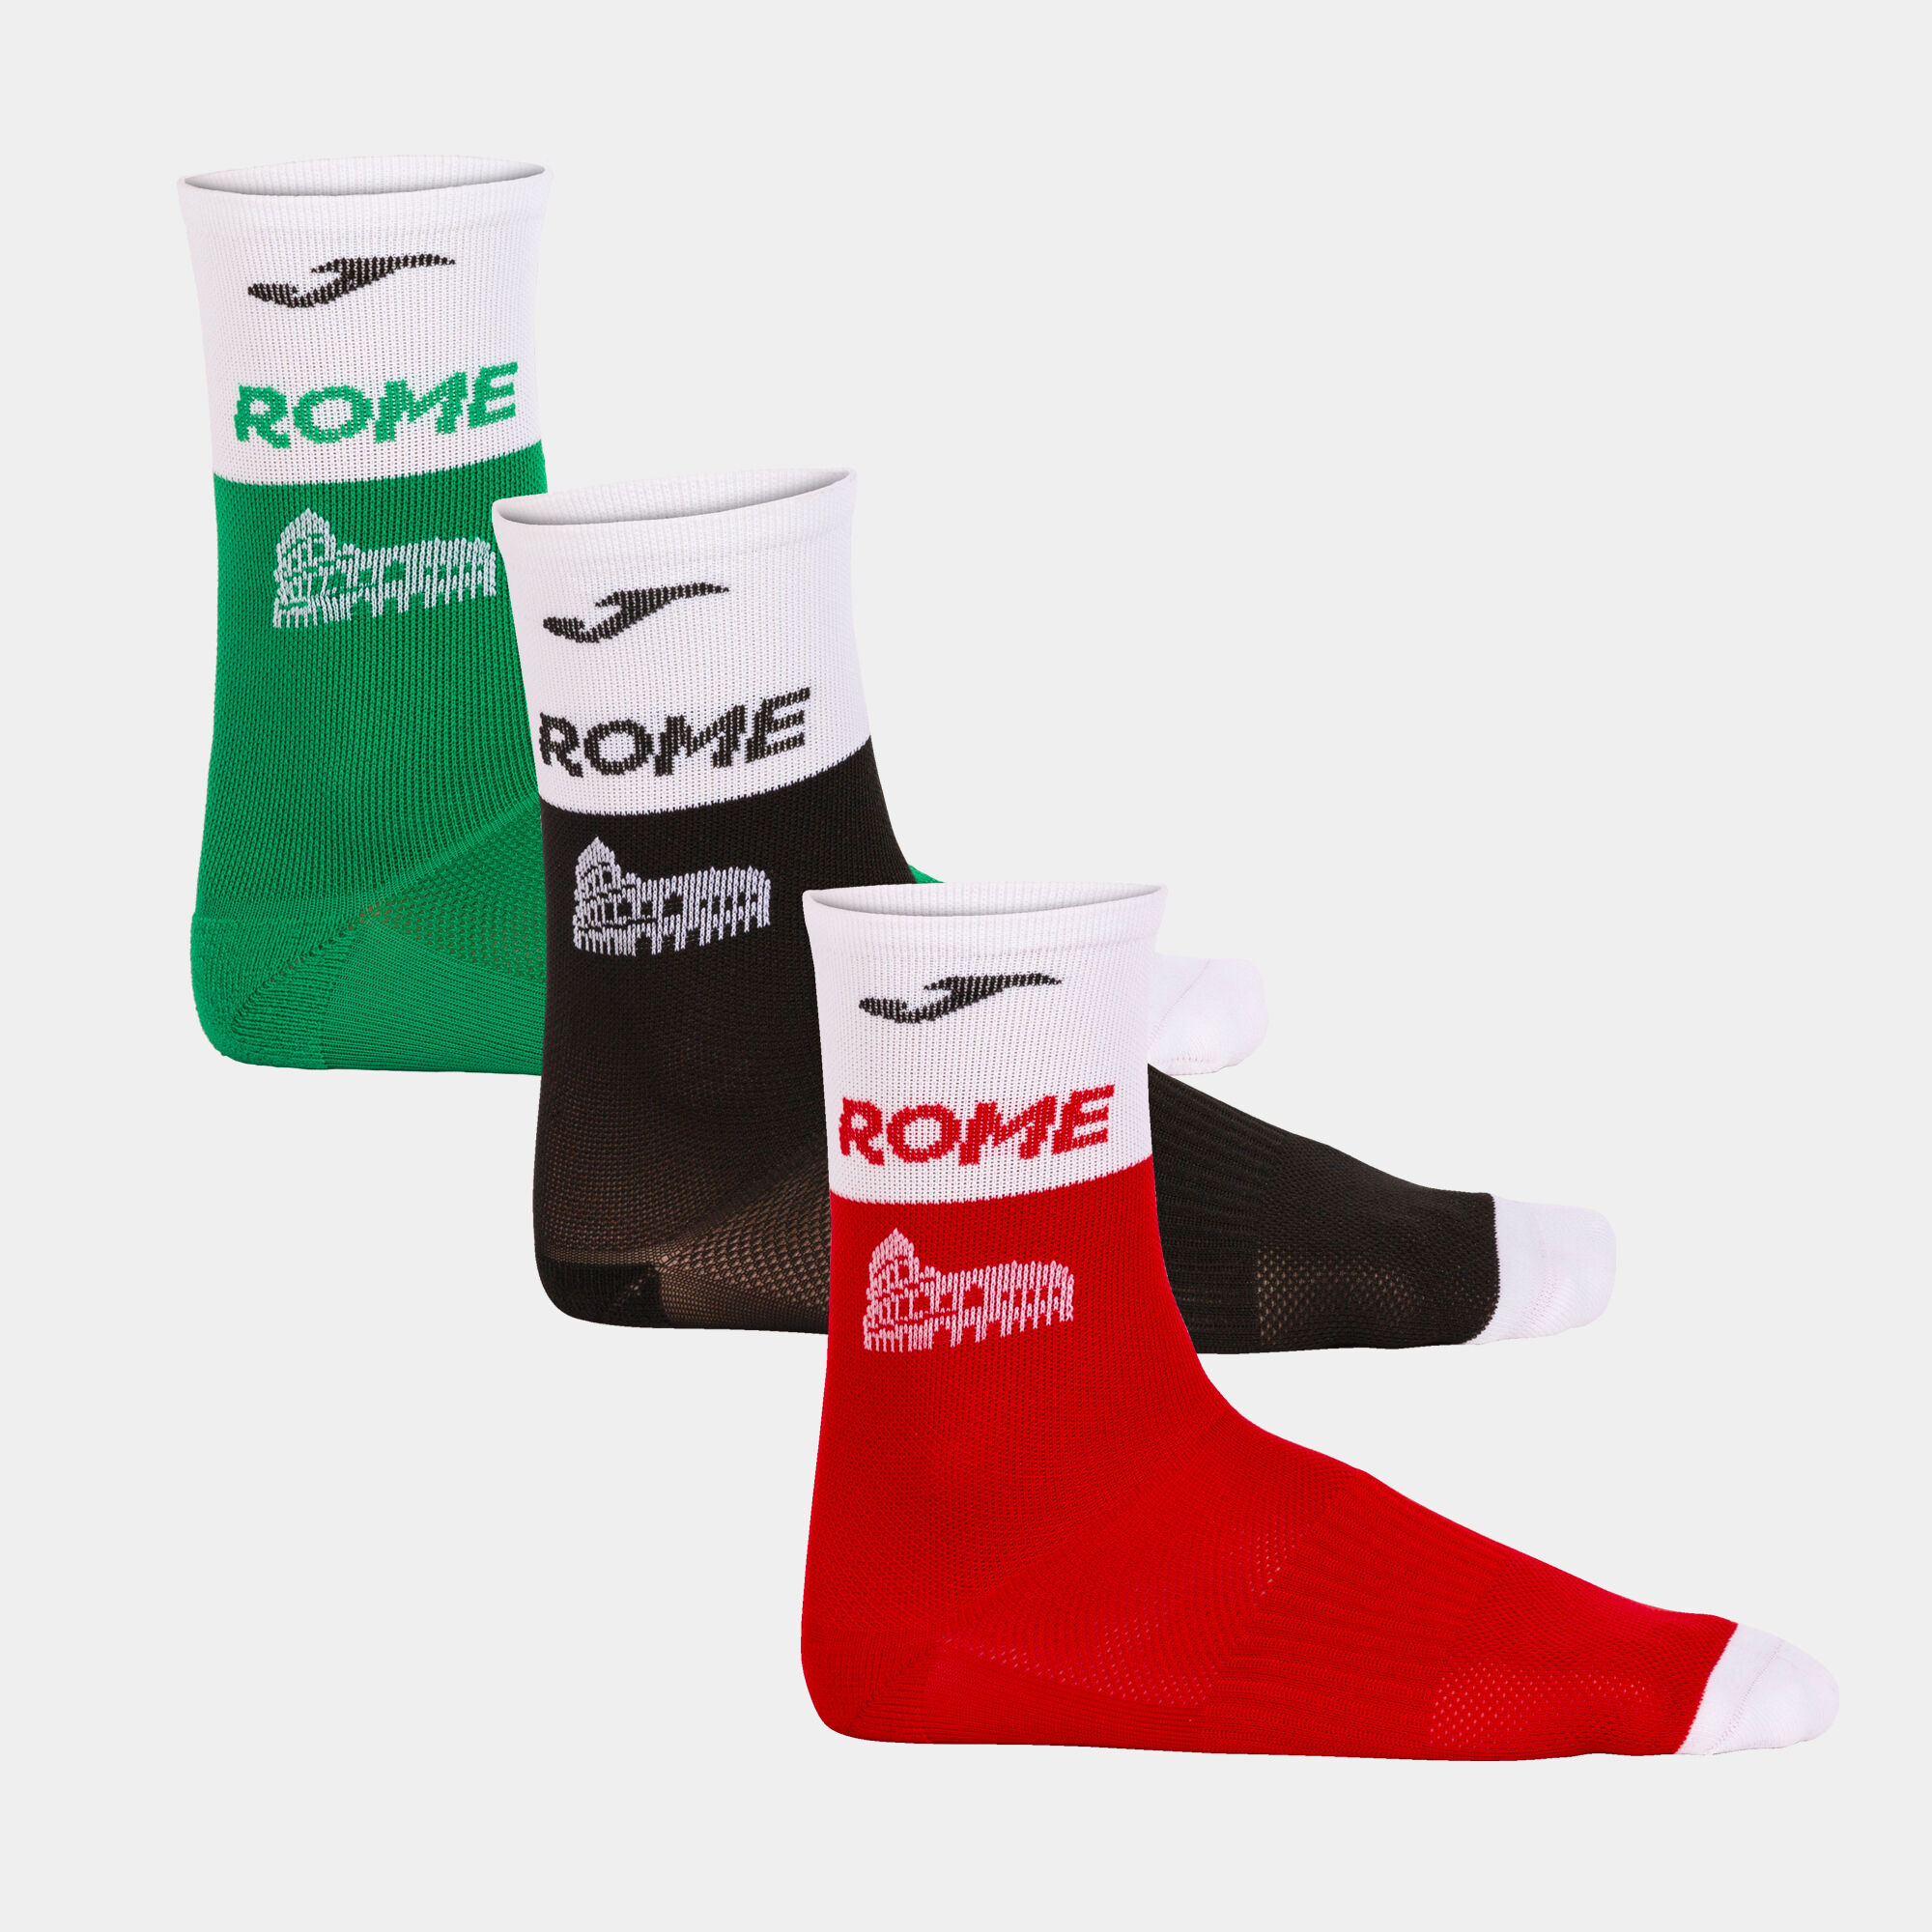 Calcetines hombre running Pro Series Joma